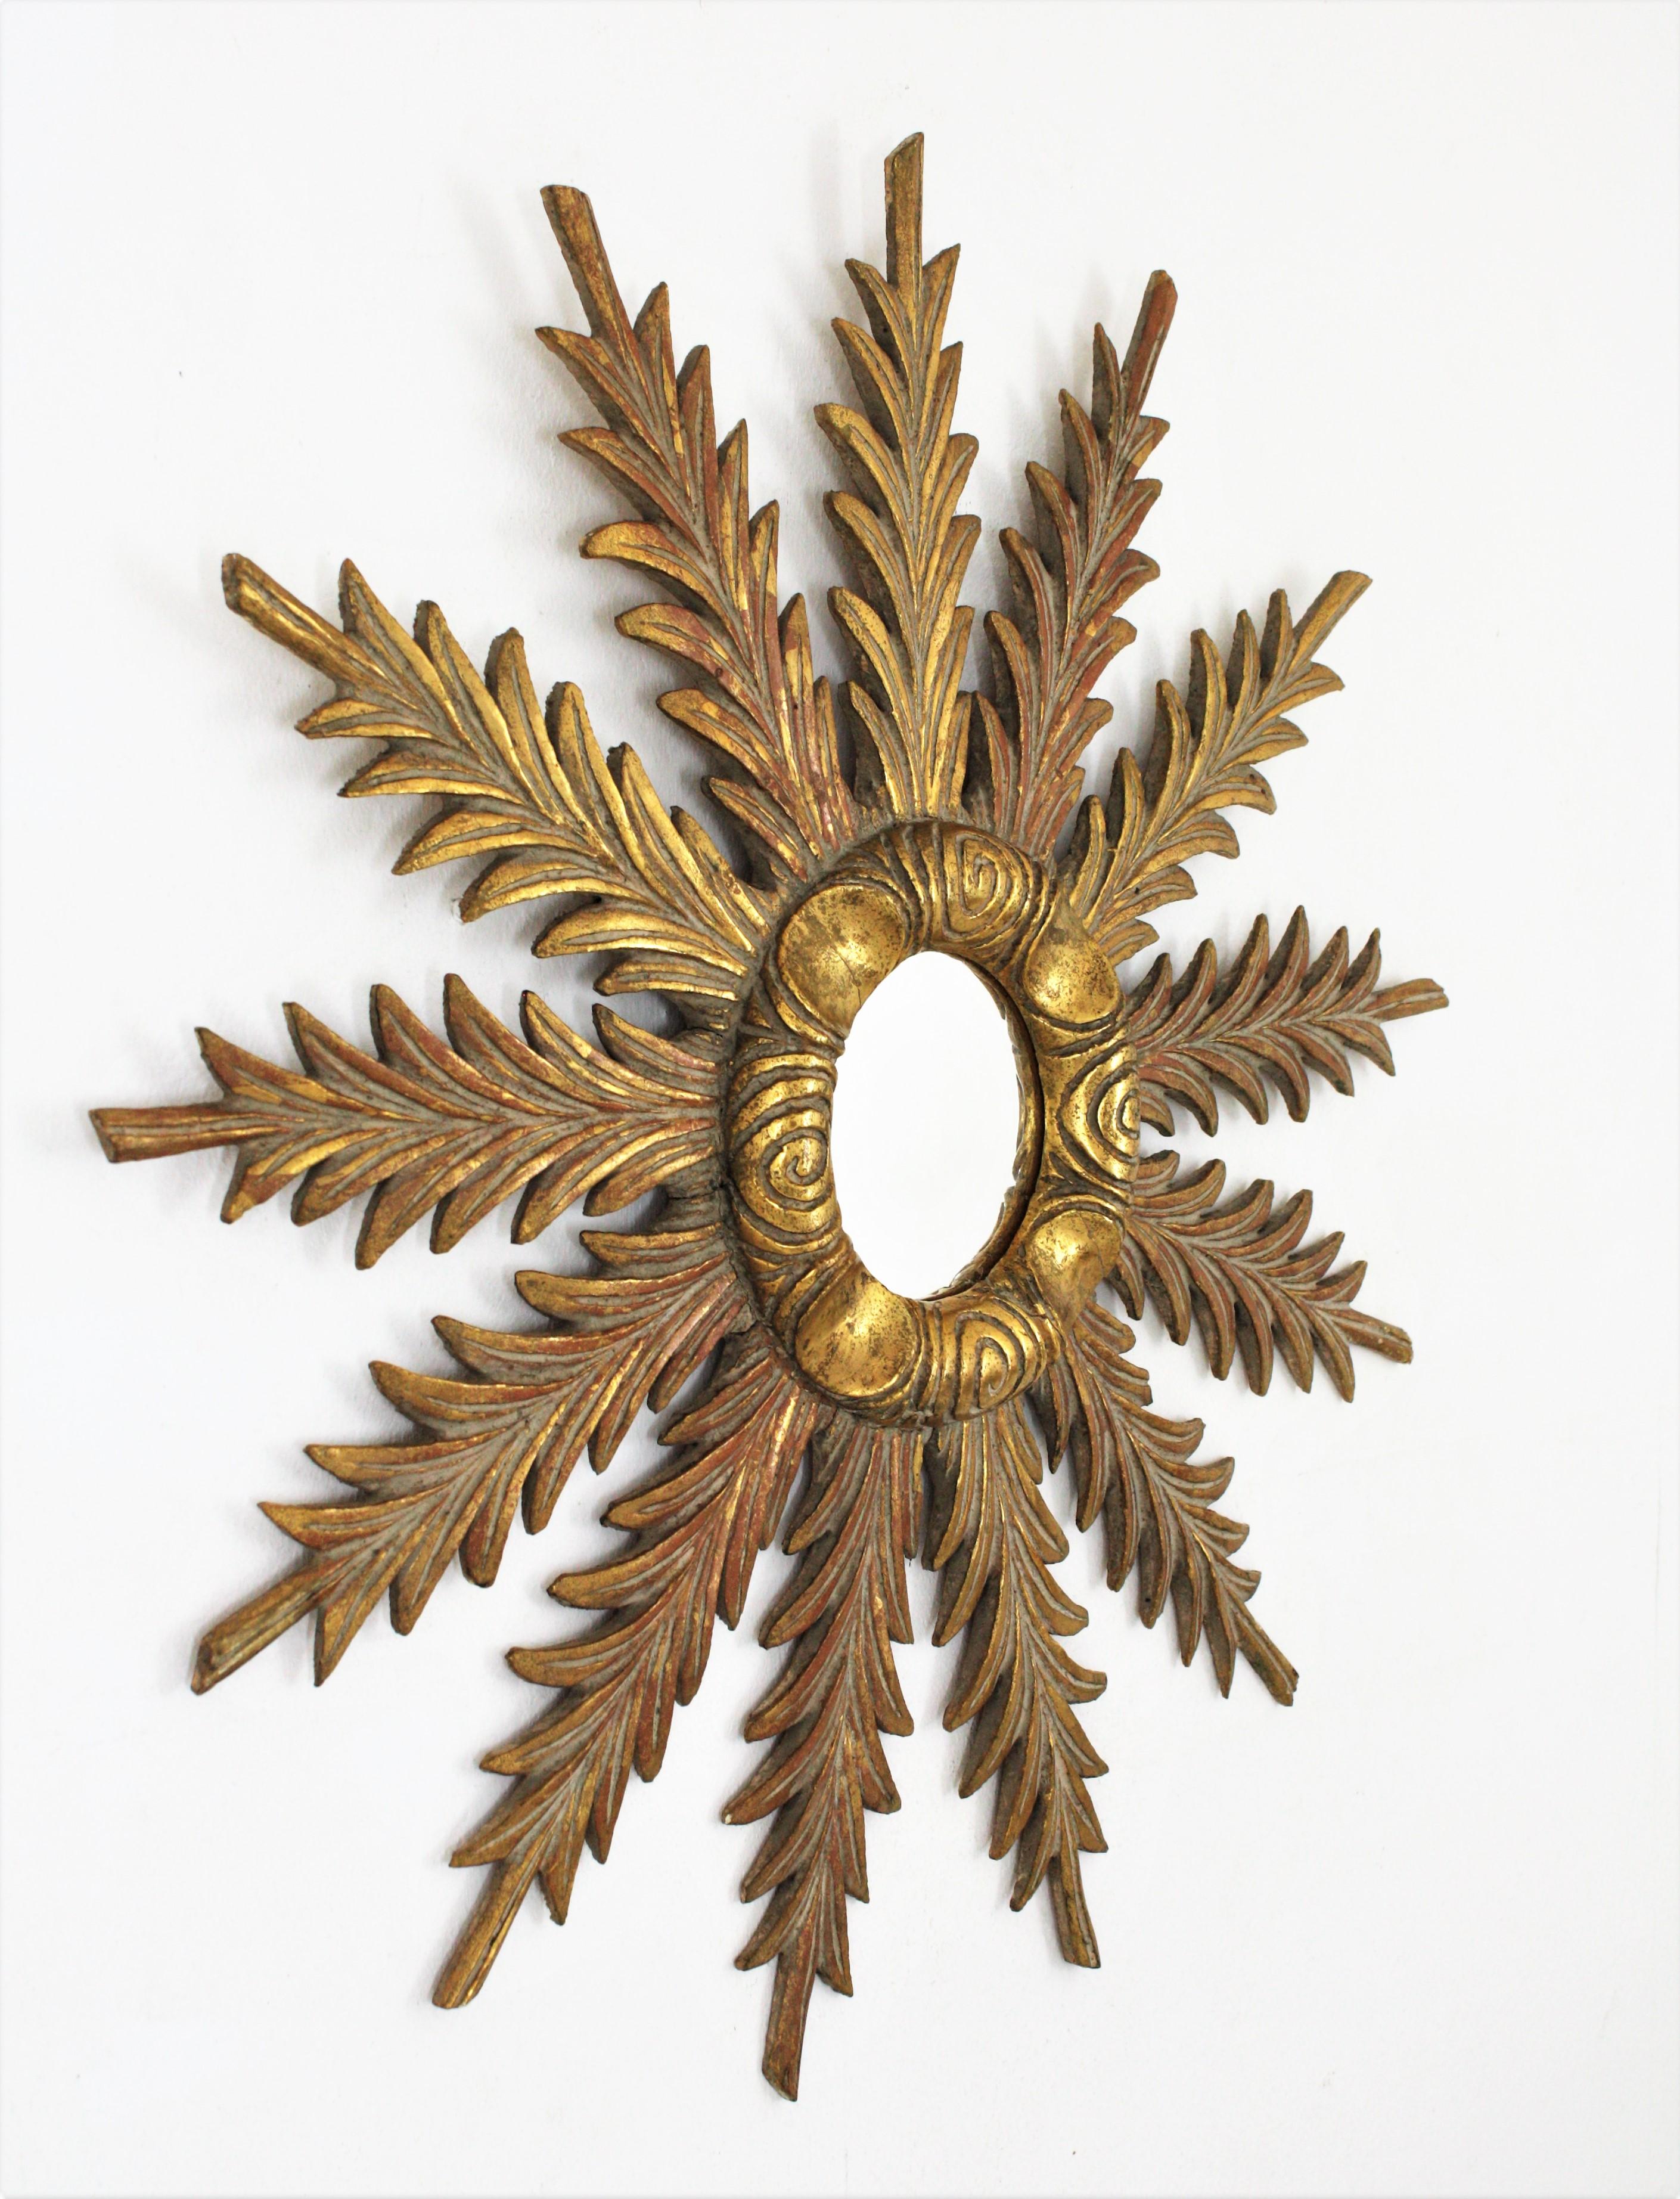 20th Century Sunburst Starburst Giltwood Mirror with Foliage Carvings, 1940s For Sale